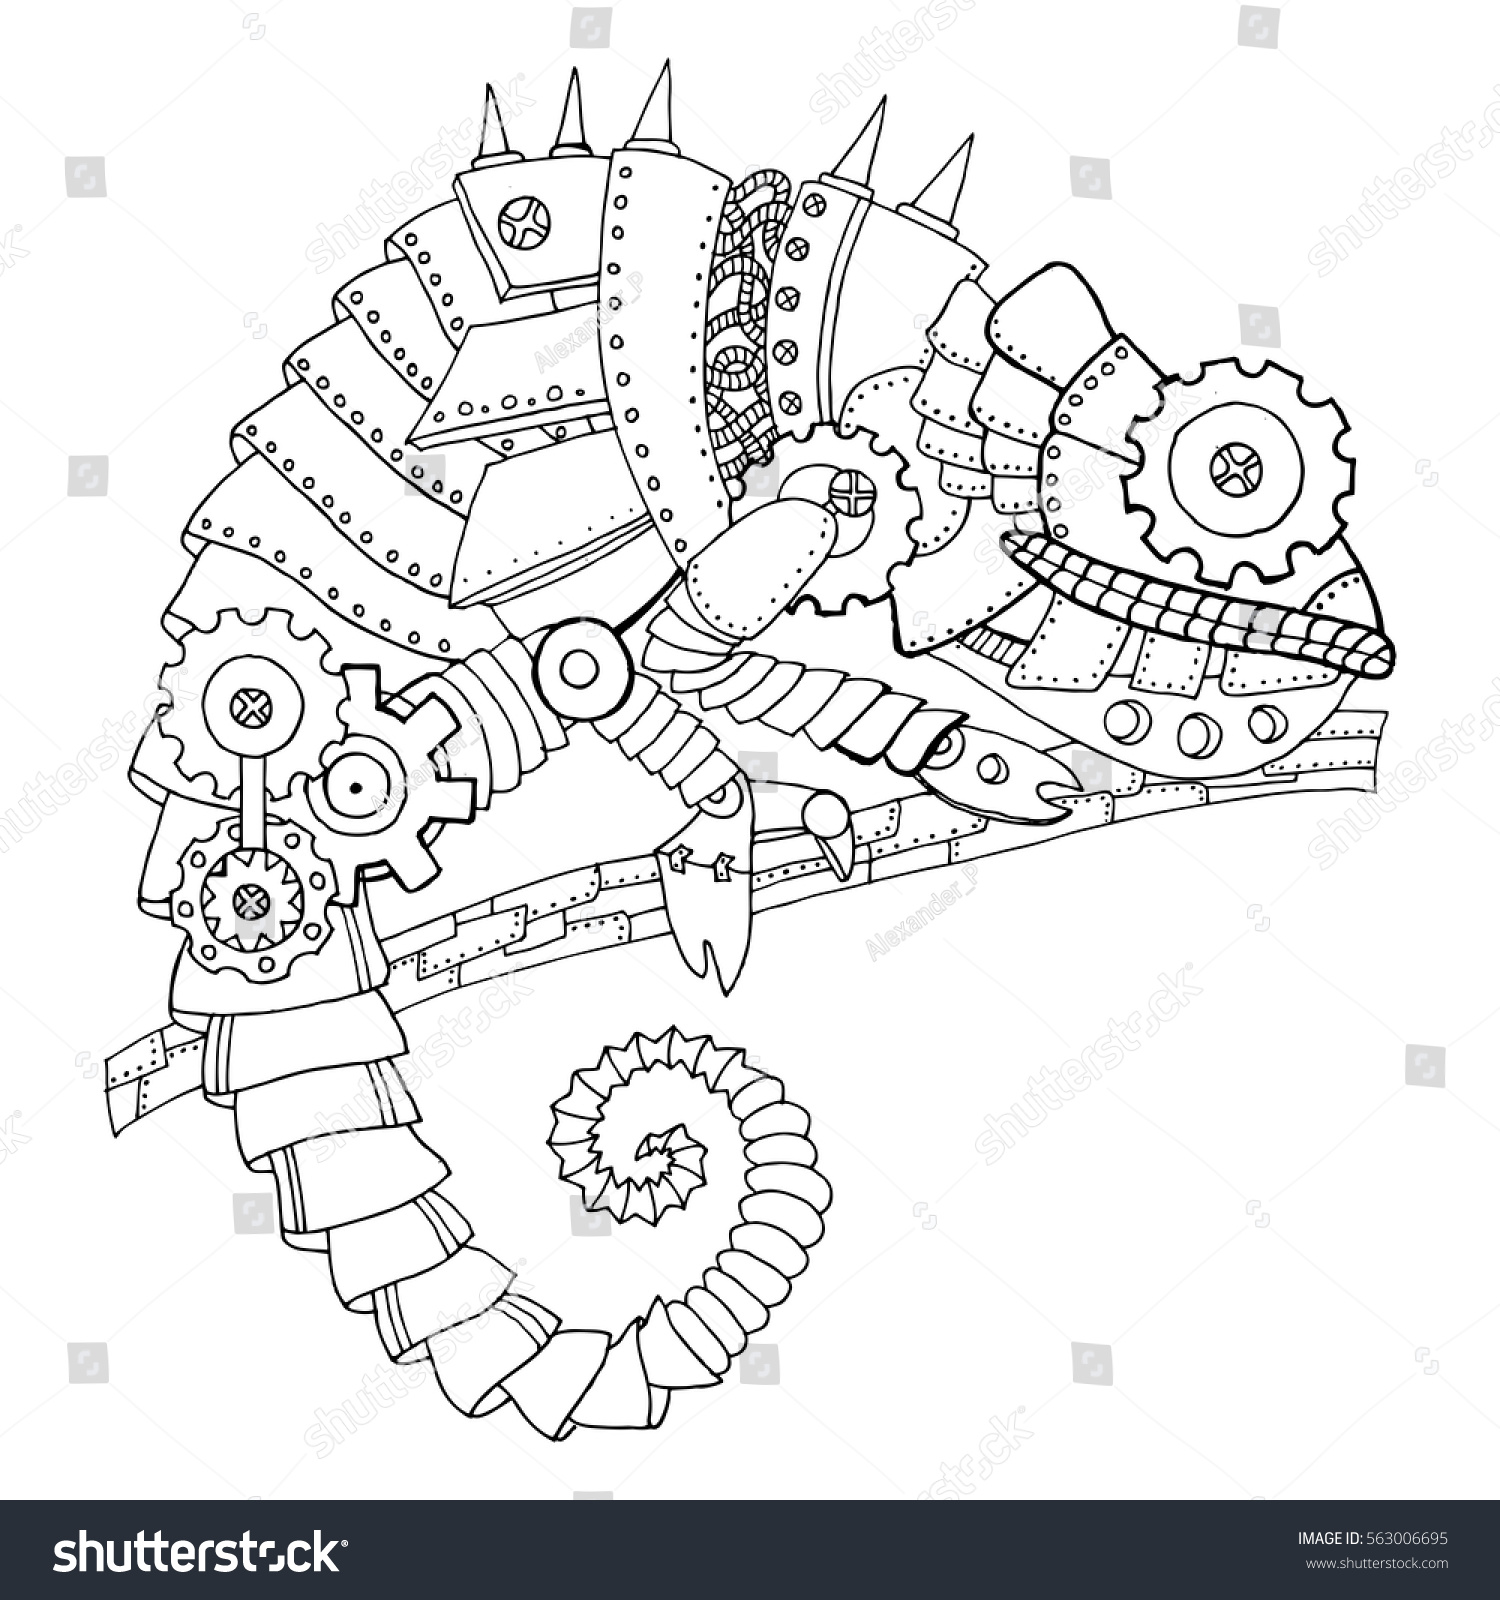 Steampunk style chameleon mechanical animal coloring stock vector royalty free